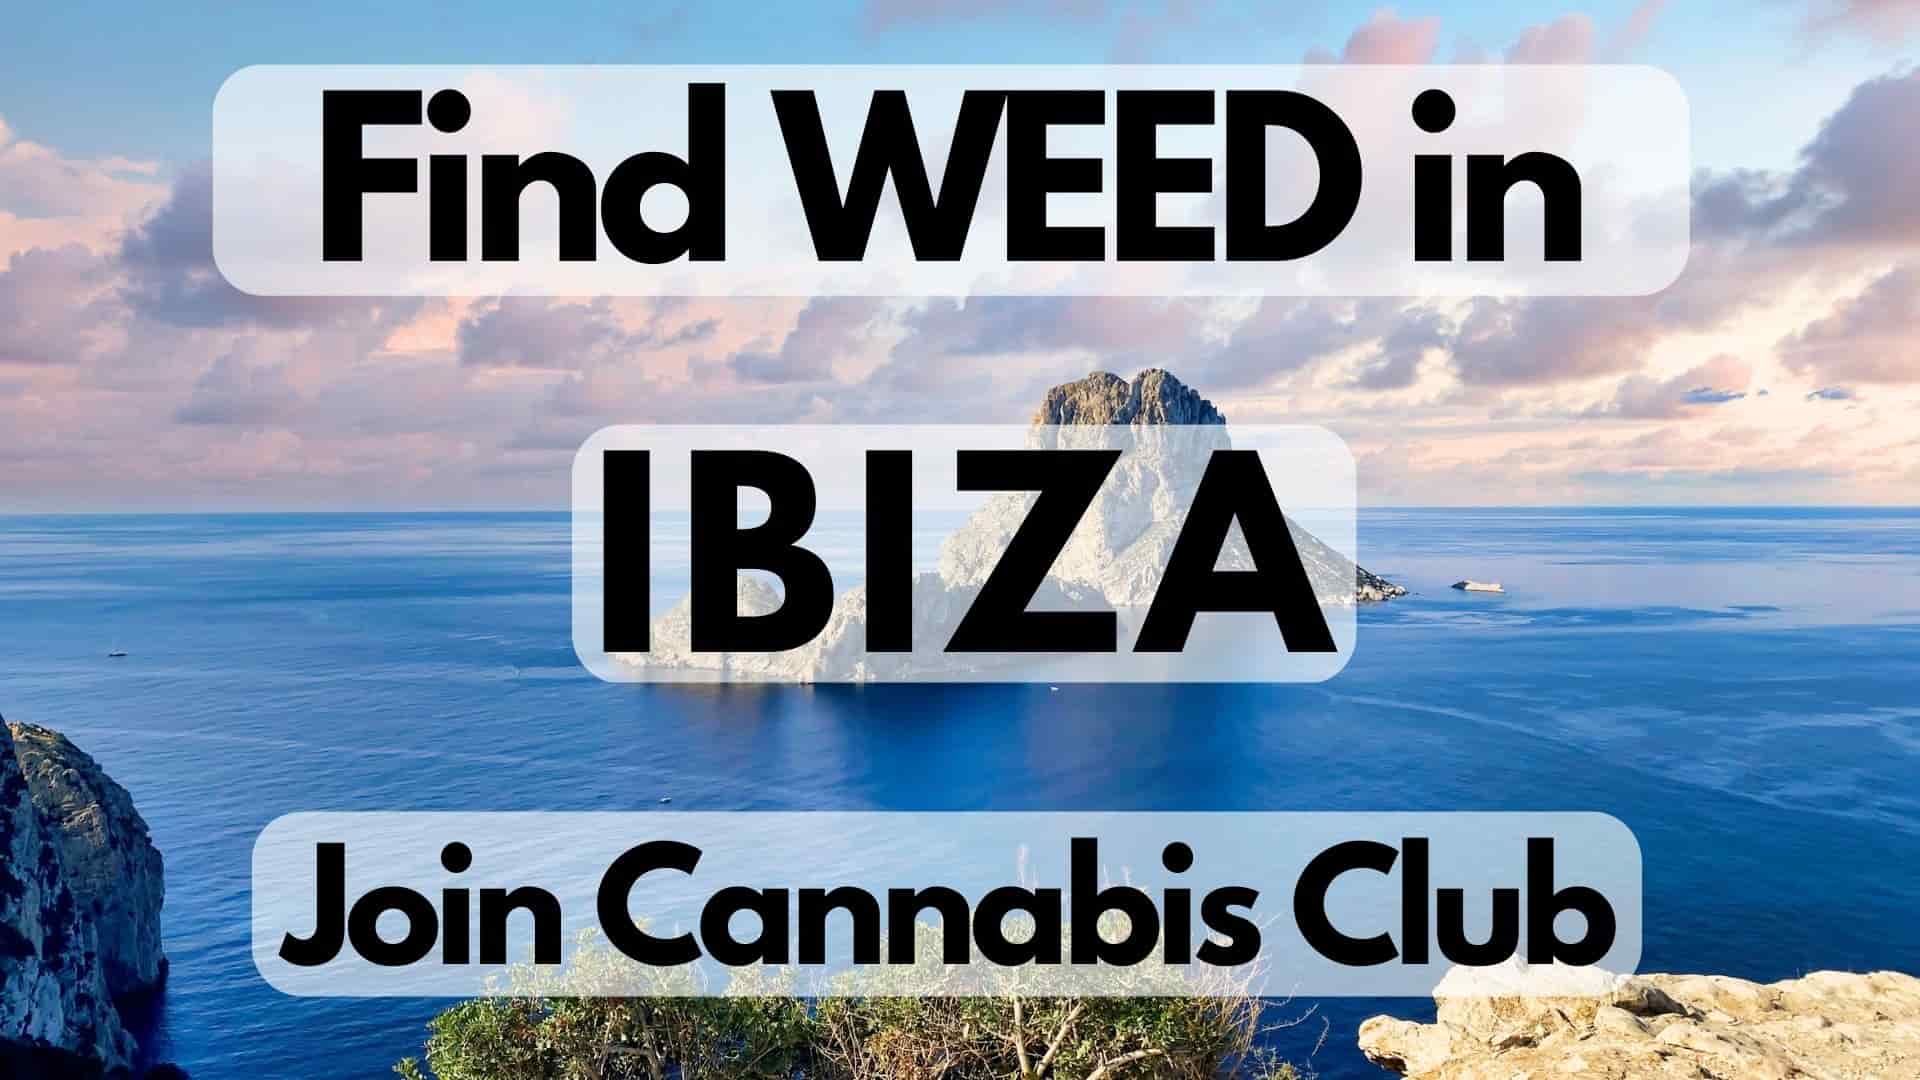 Find Weed in Ibiza / Join a Cannabis Social Club Today